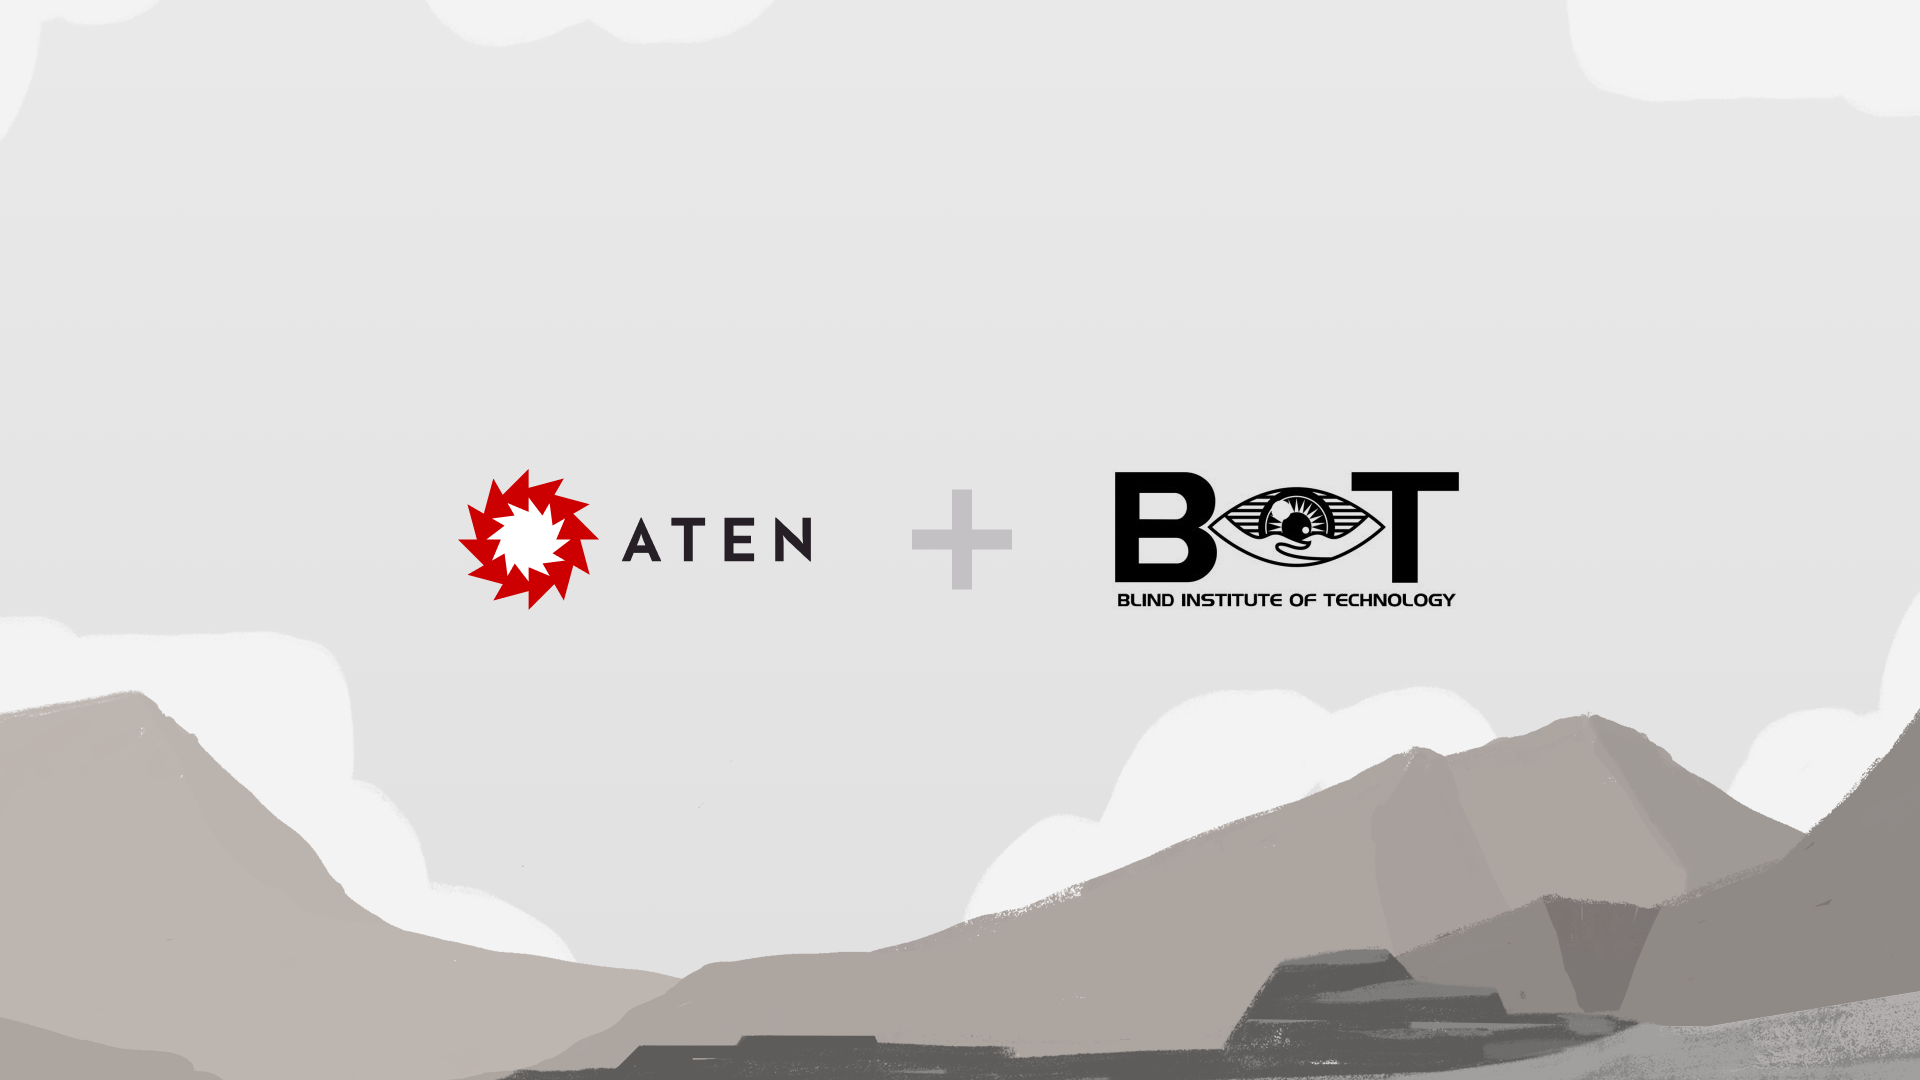 Image of Aten and Blind Institute of Technology logos